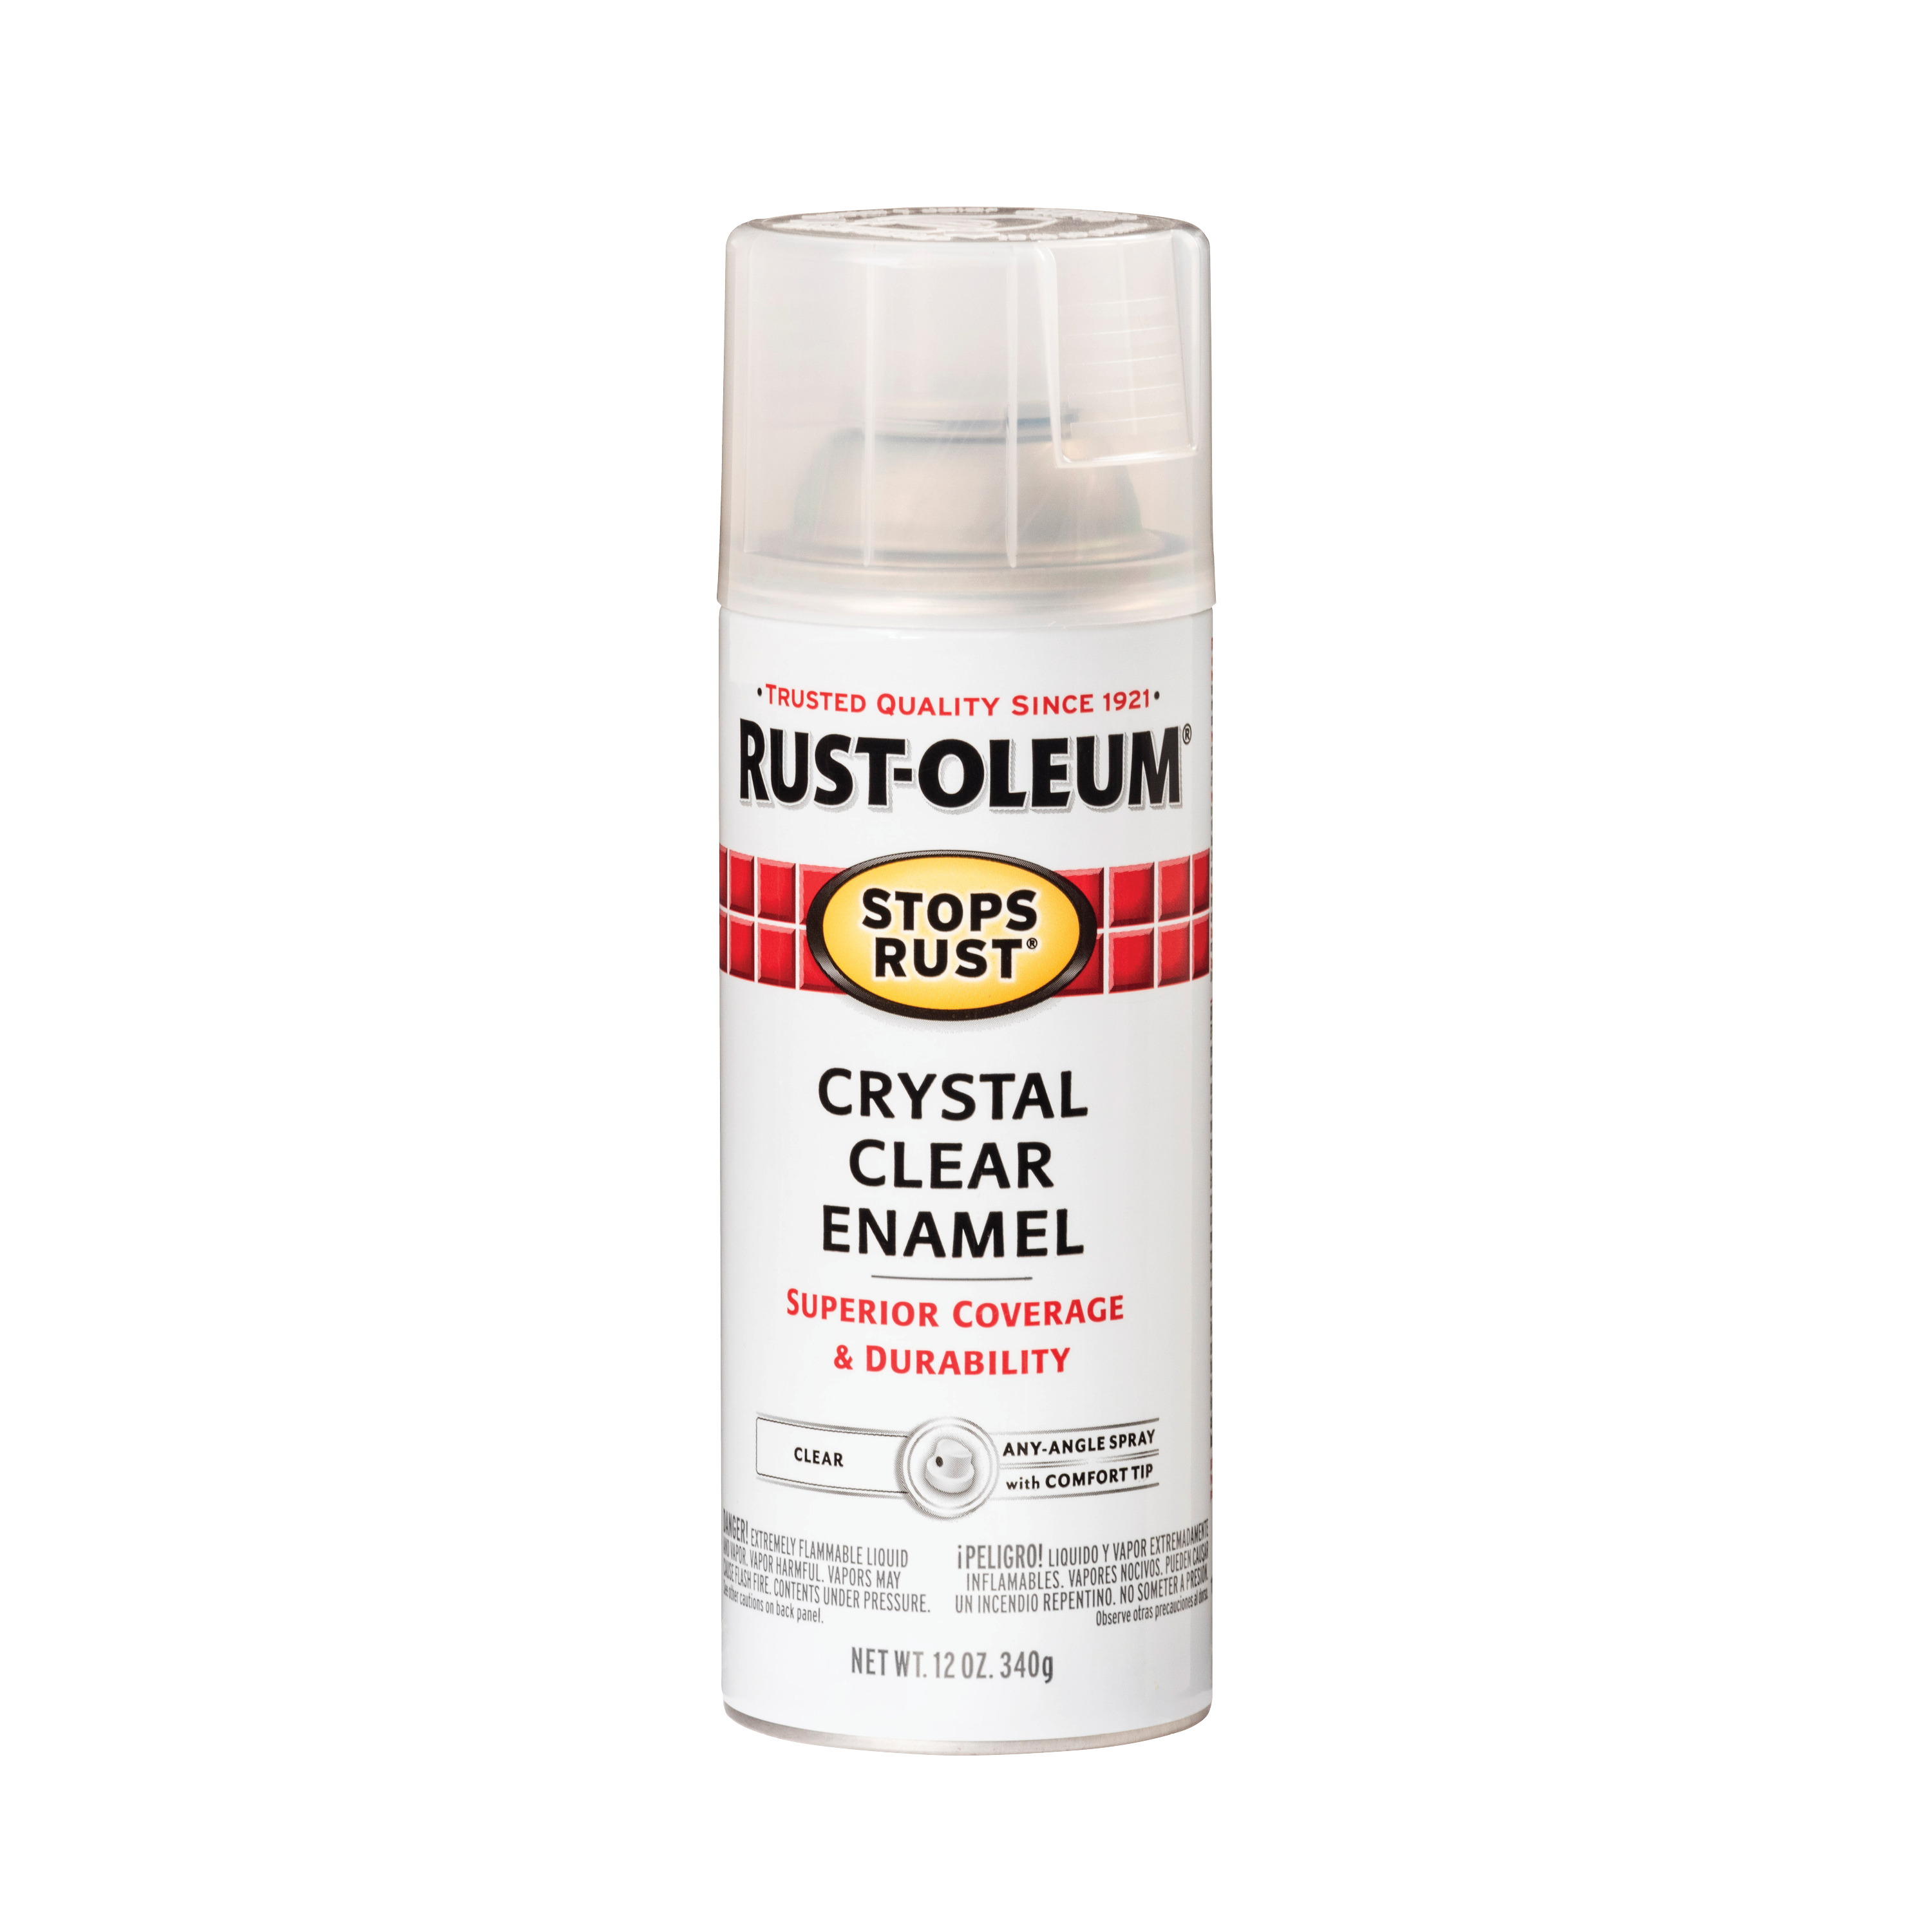 Crystal Clear, Rust-Oleum Stops Rust Gloss Protective Enamel Spray Paint-7701830, 12 oz - image 3 of 12